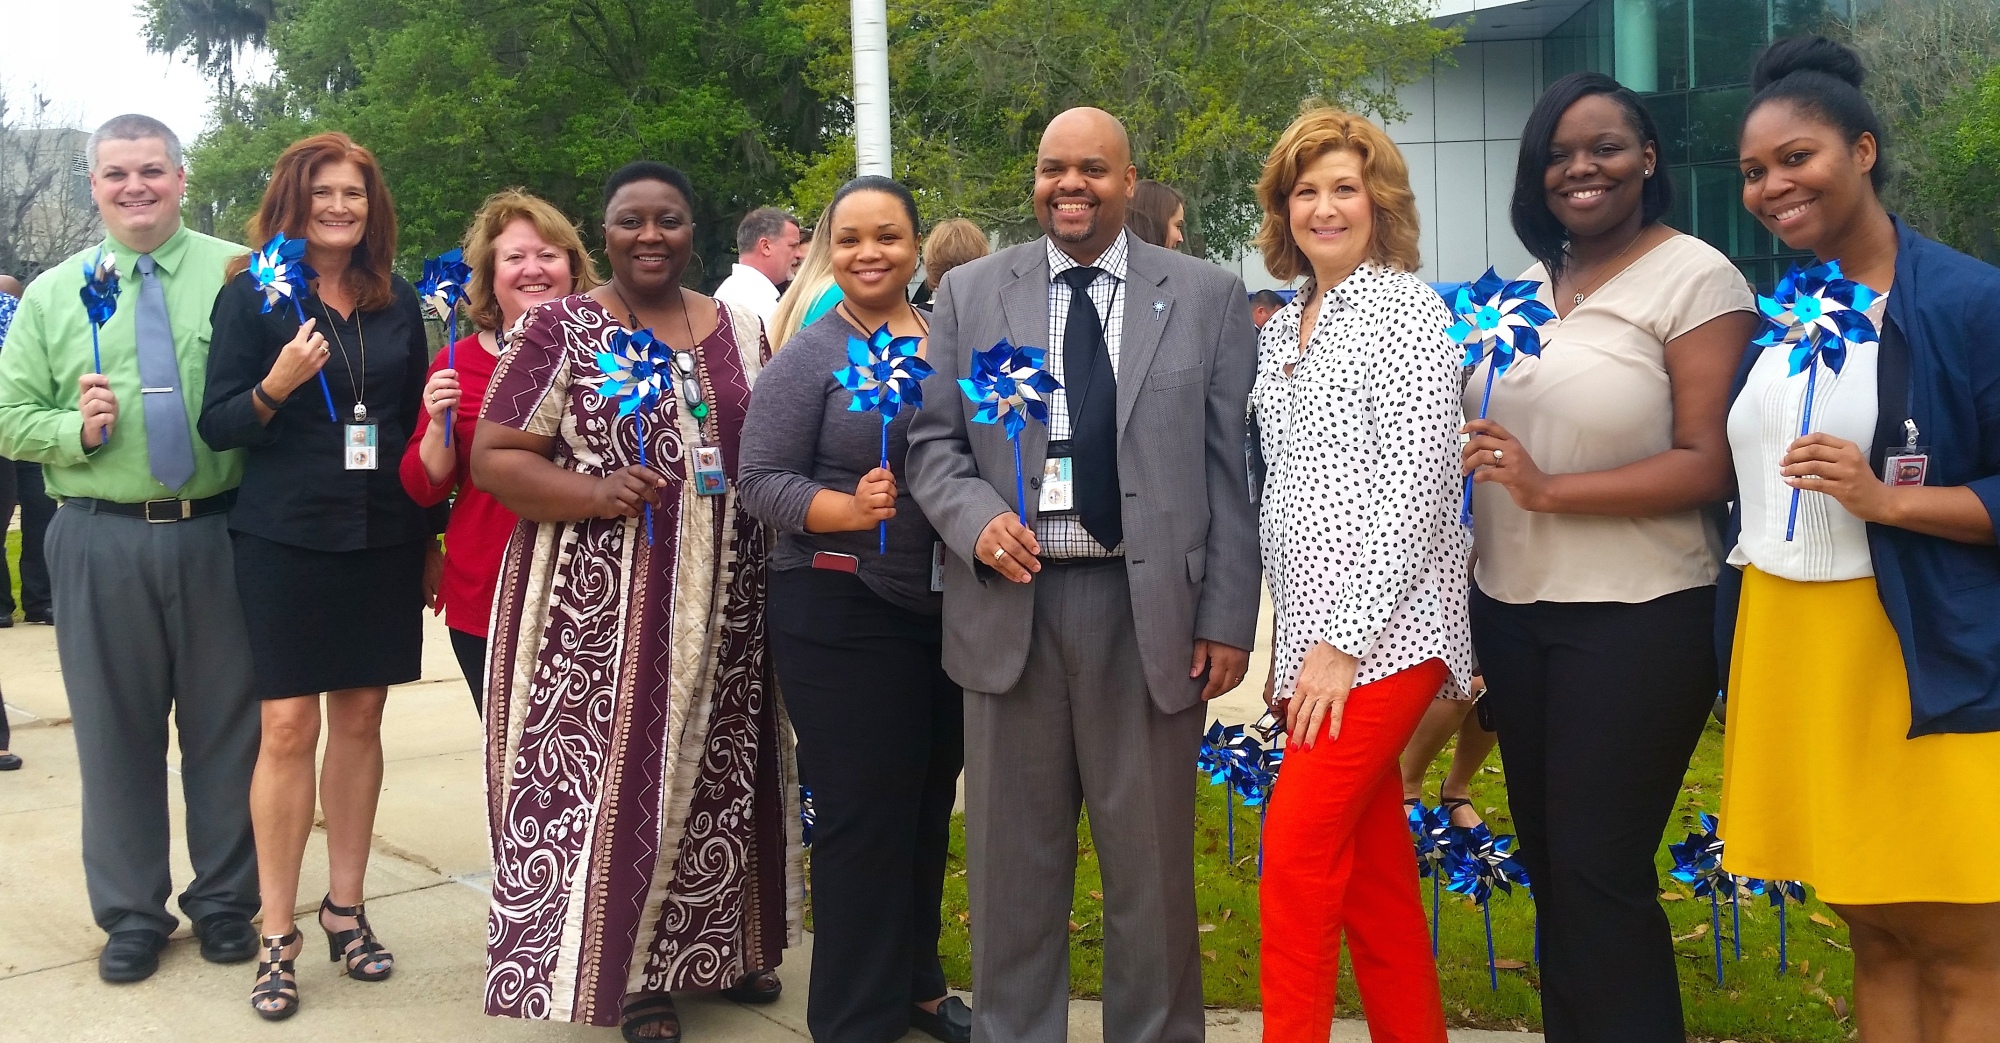 DBS Staff standing in front of the Turlington Building holding blue and silver pinwheels